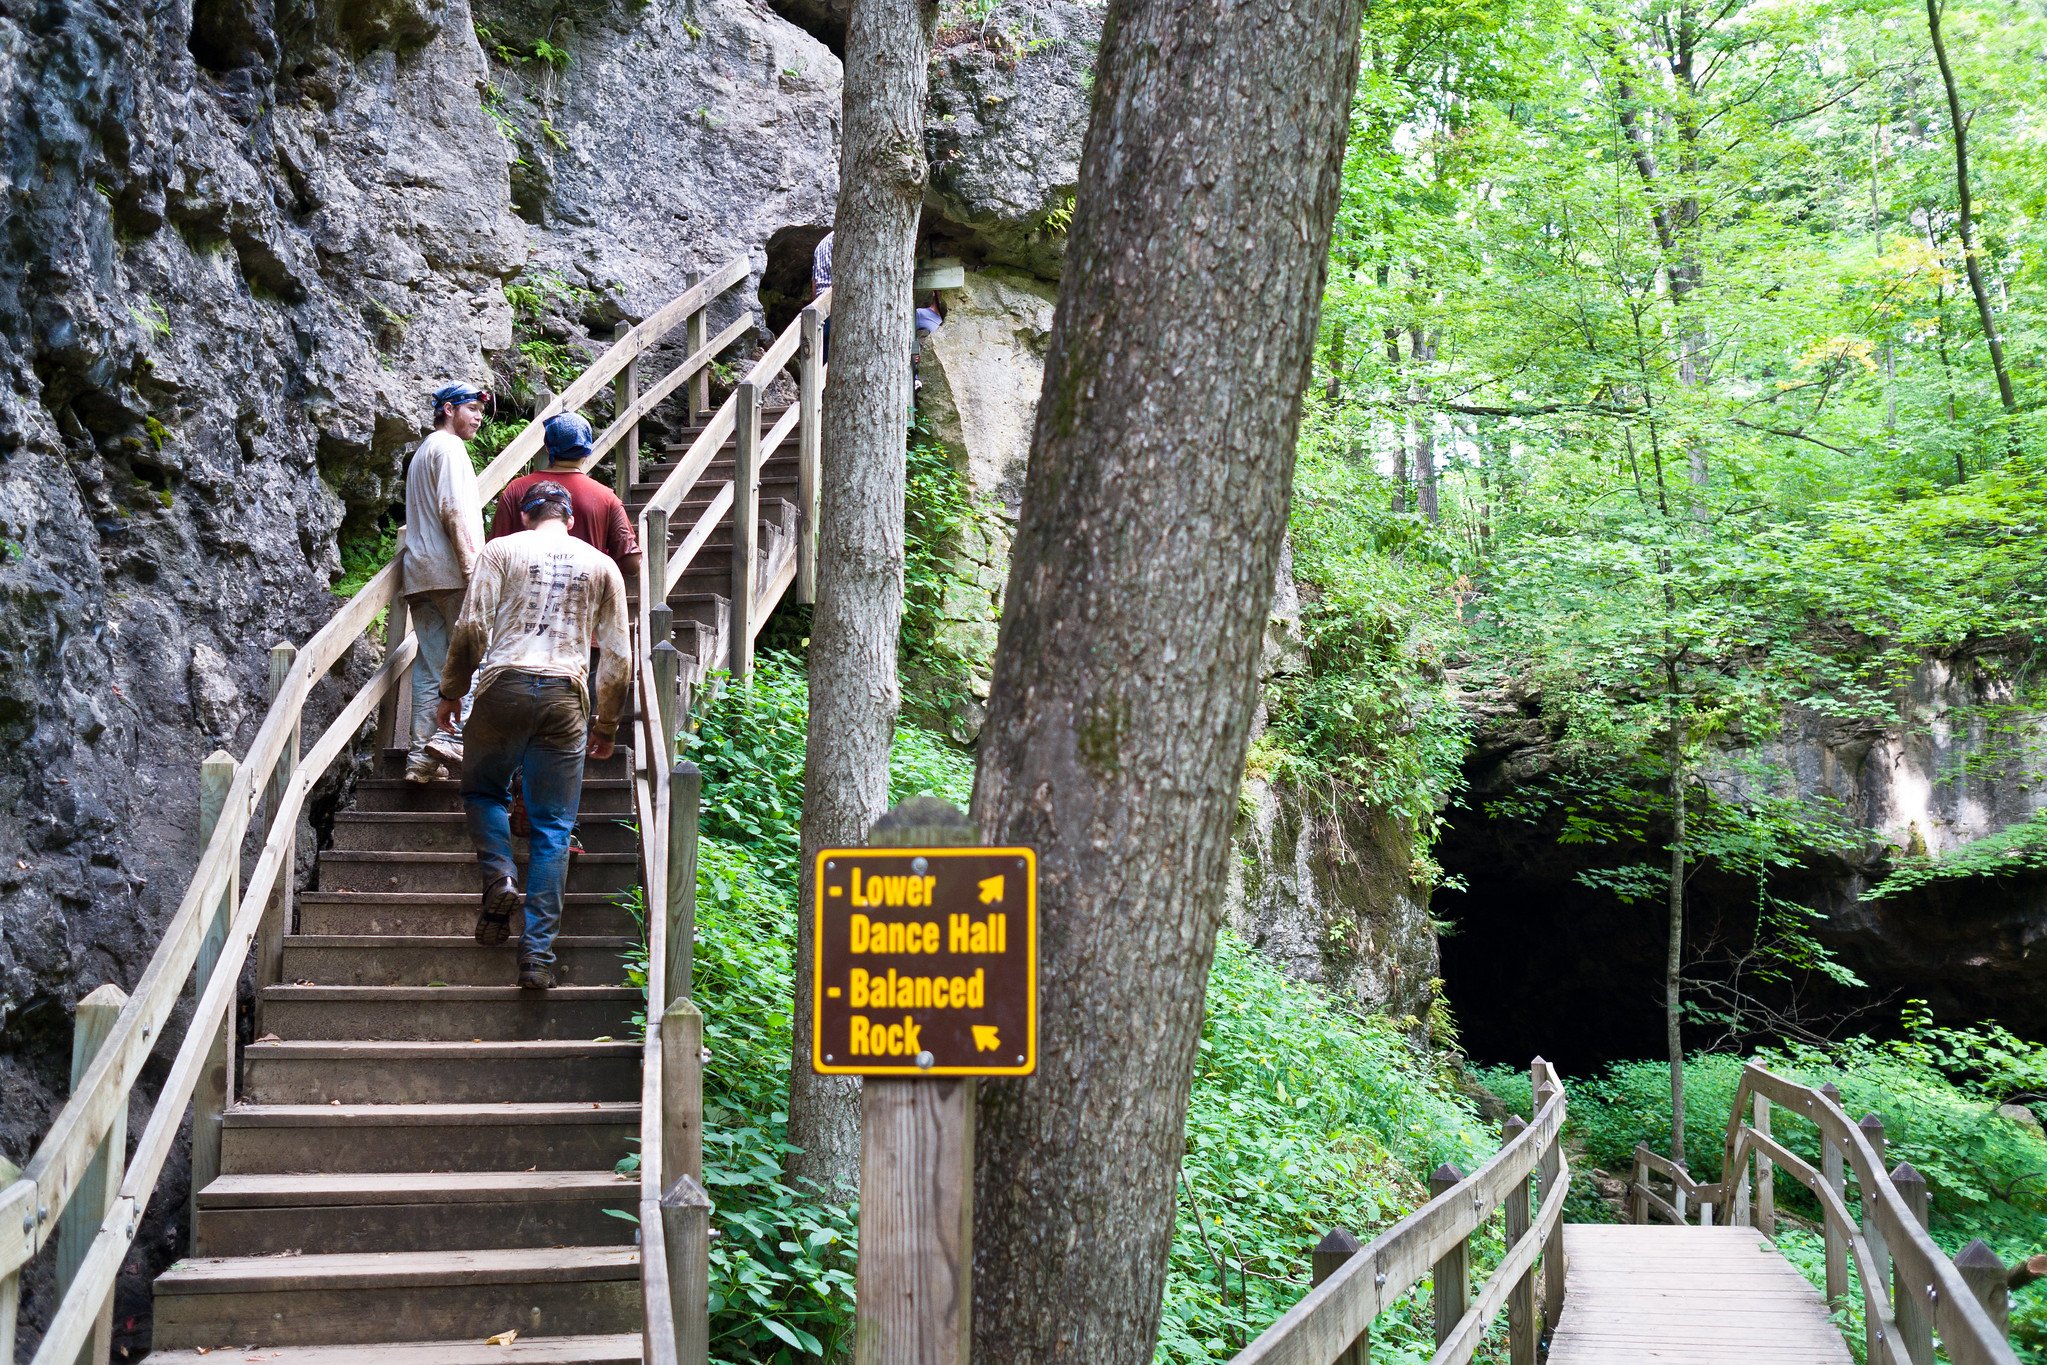 People in Maquoketa Caves State Park. | Source: flickr.com/Phil Roeder